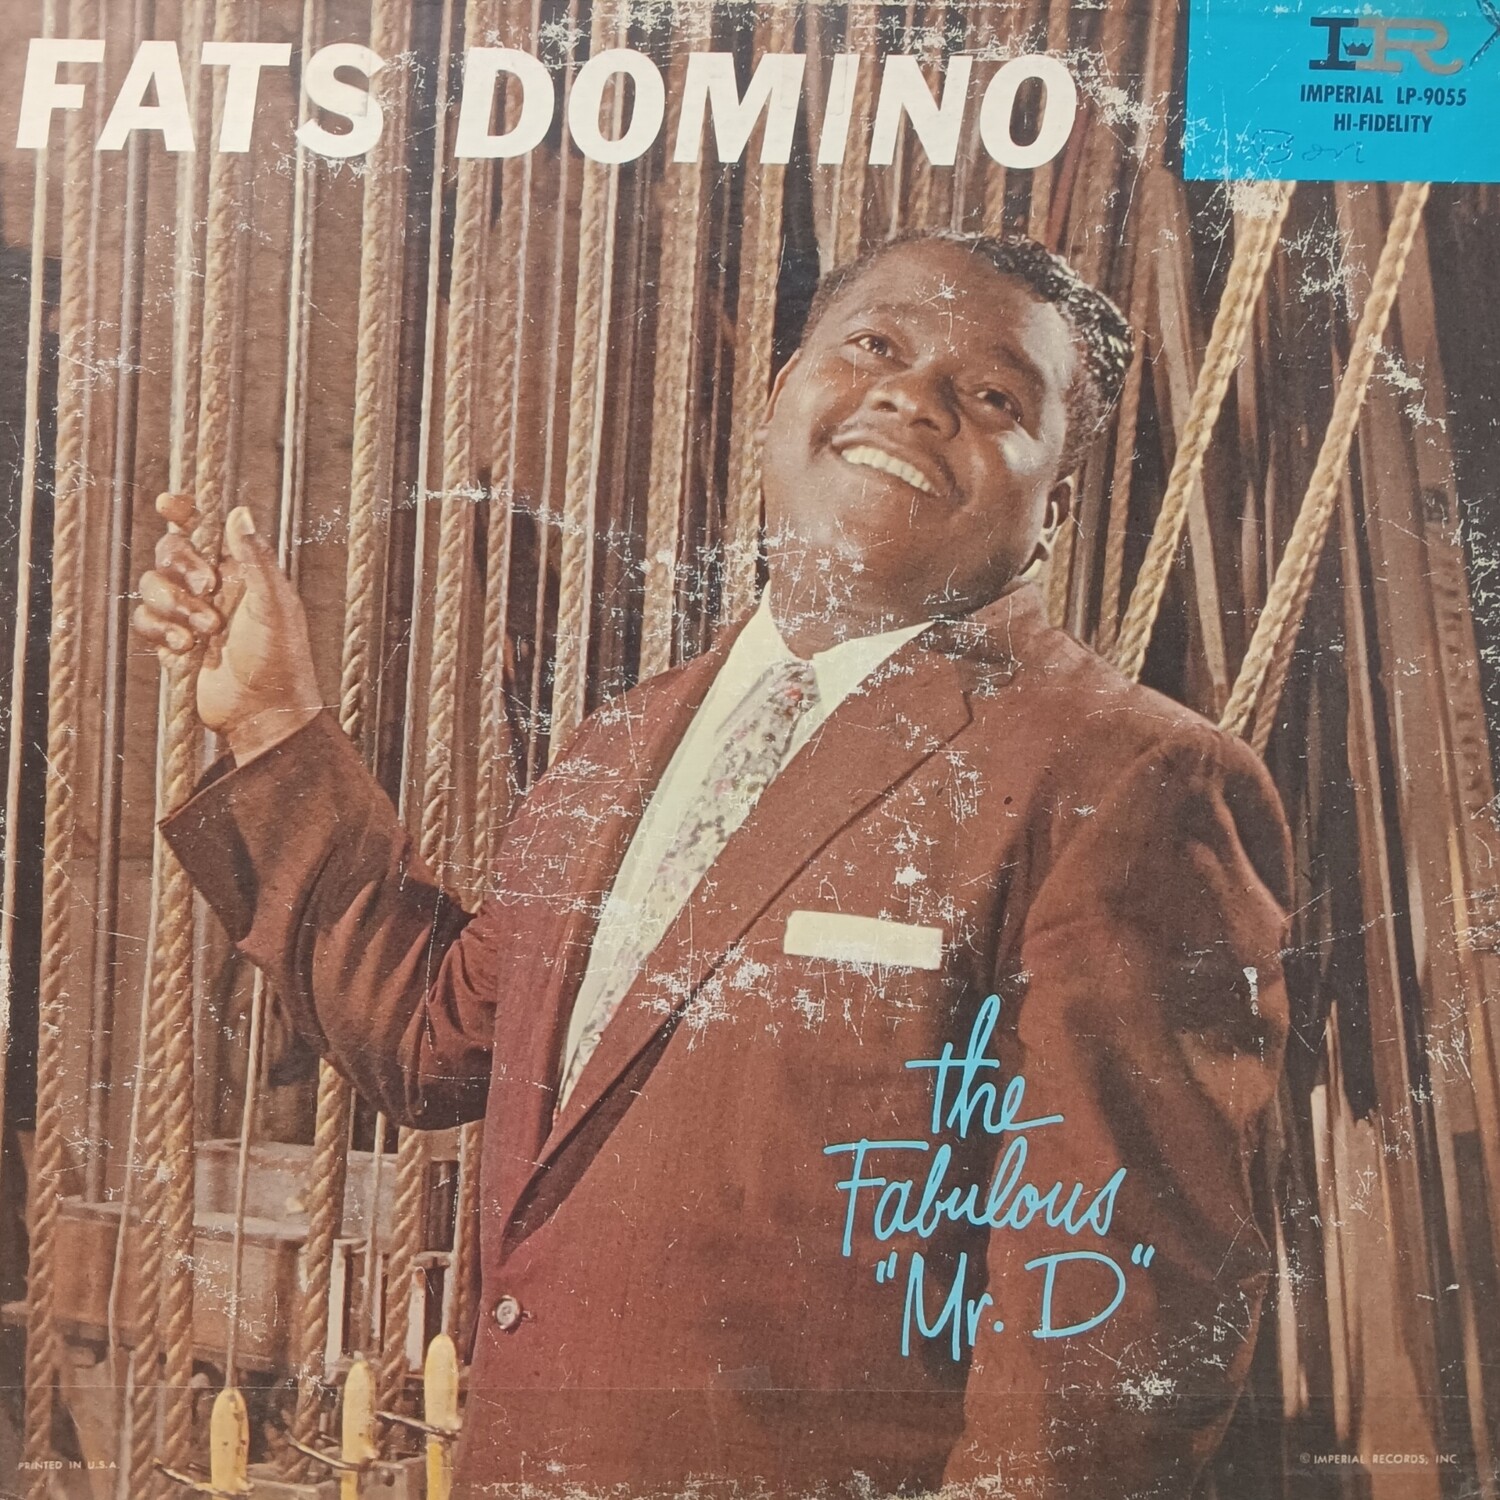 FATS DOMINO - The Fabulous Mr. D